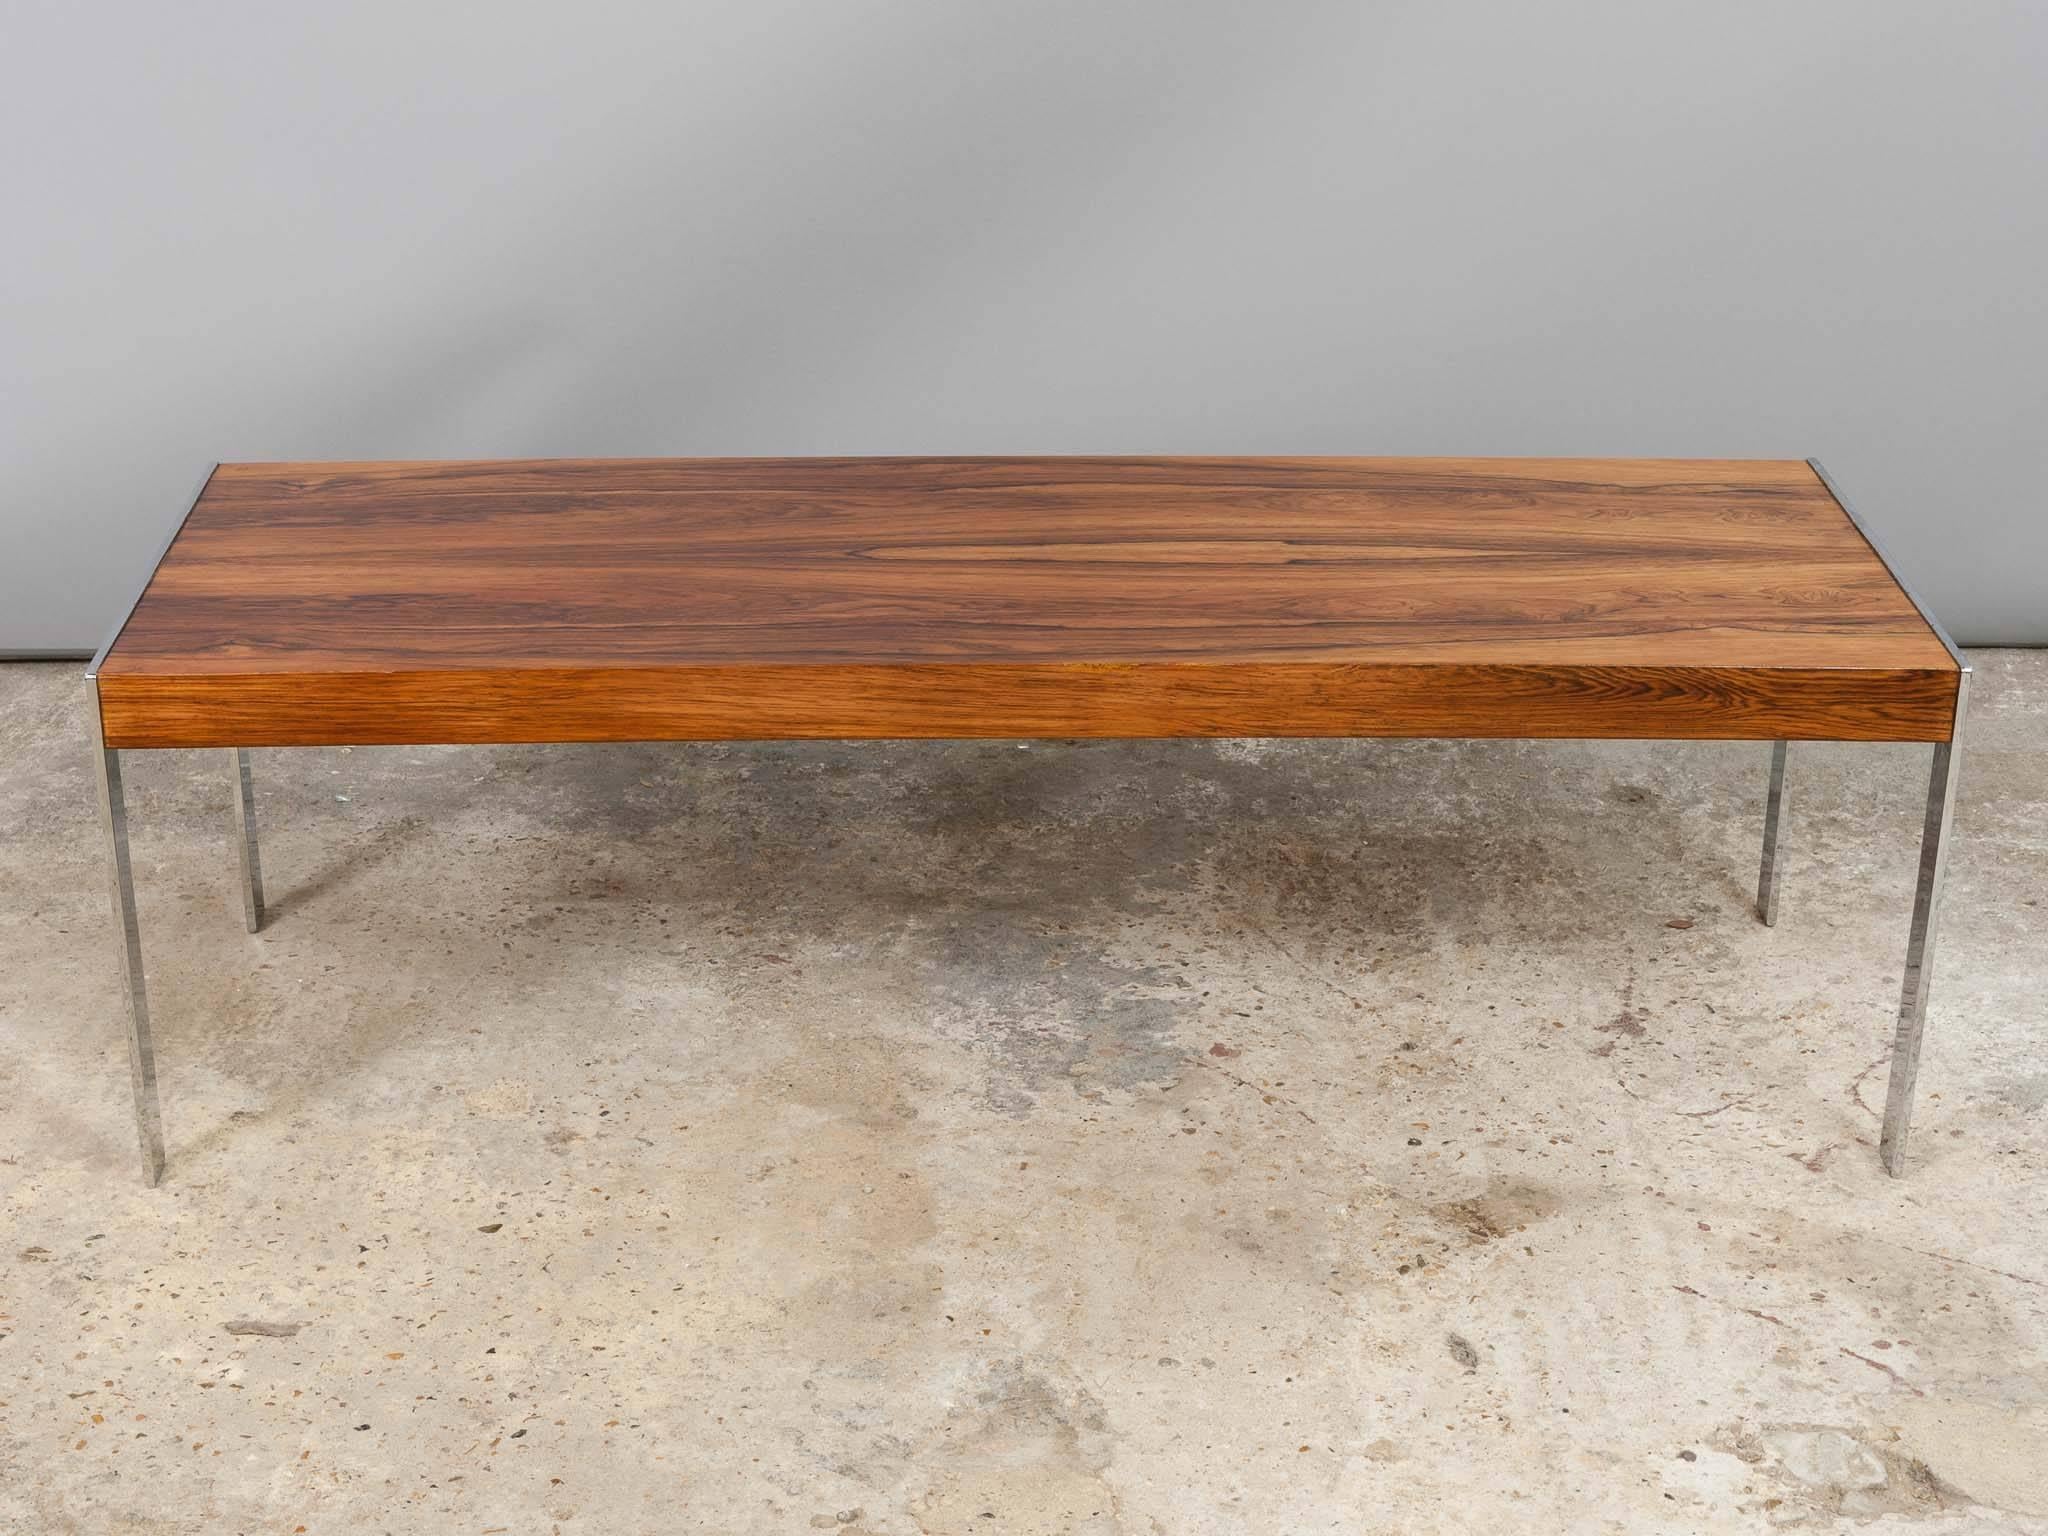 Great Britain (UK) 1960s Midcentury Merrow Associates Rosewood Chrome Coffee Table Richard Young